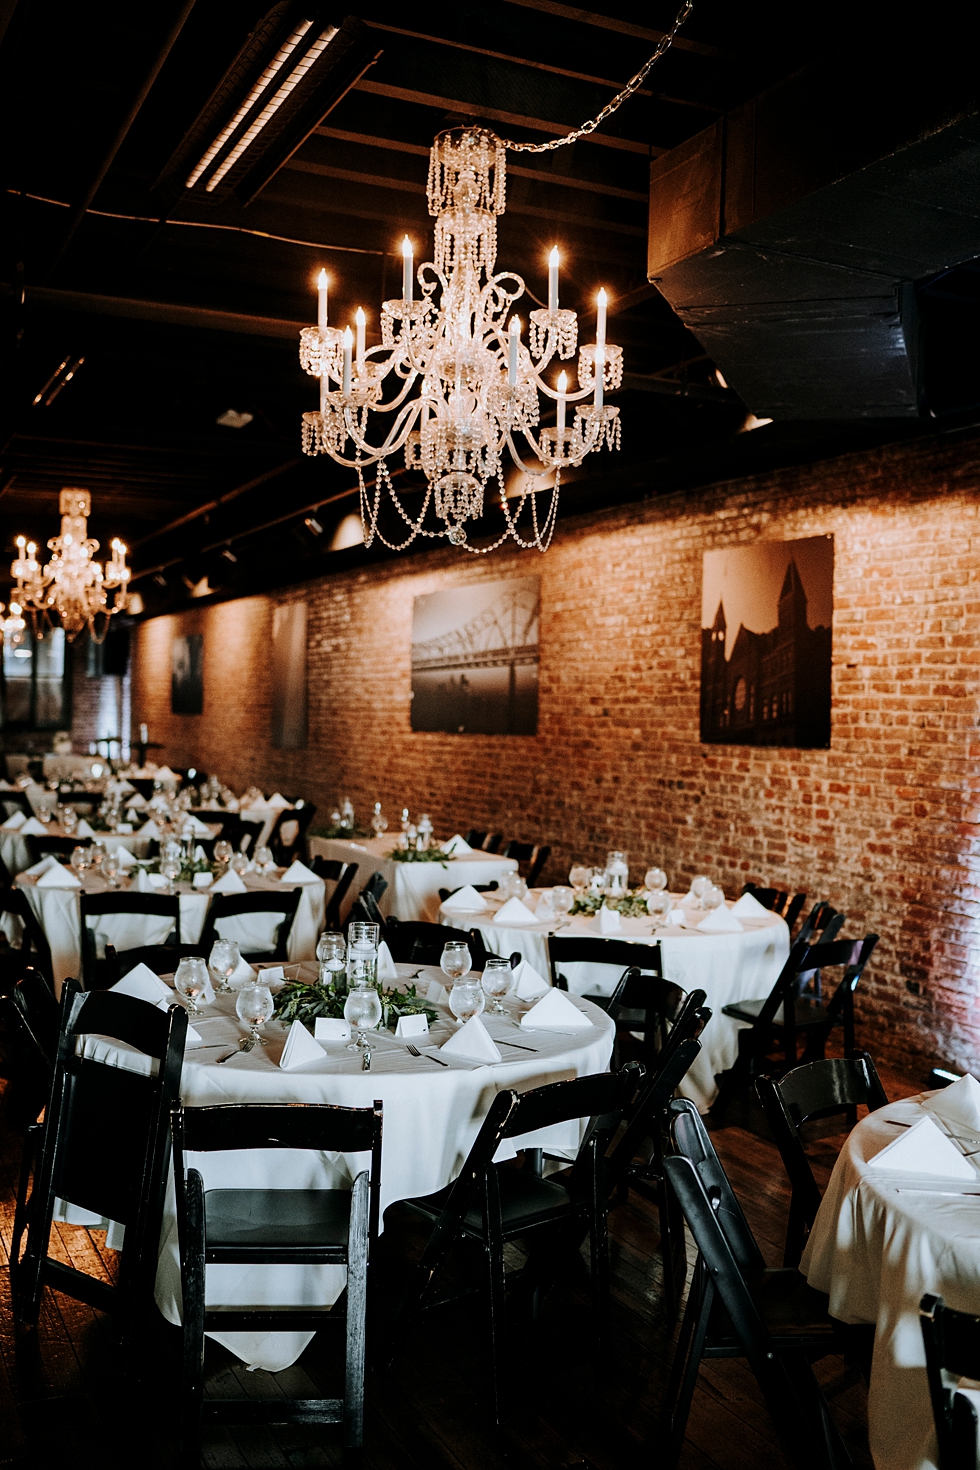  Gorgeous intimate wedding venue featuring black and white wedding colors with greenery accents #weddinggoals #weddingphotographer #married #ceremonyandreception #kentuckyphotographer #indianaphotographer #louisvillephotographer #weddingphotos #husba